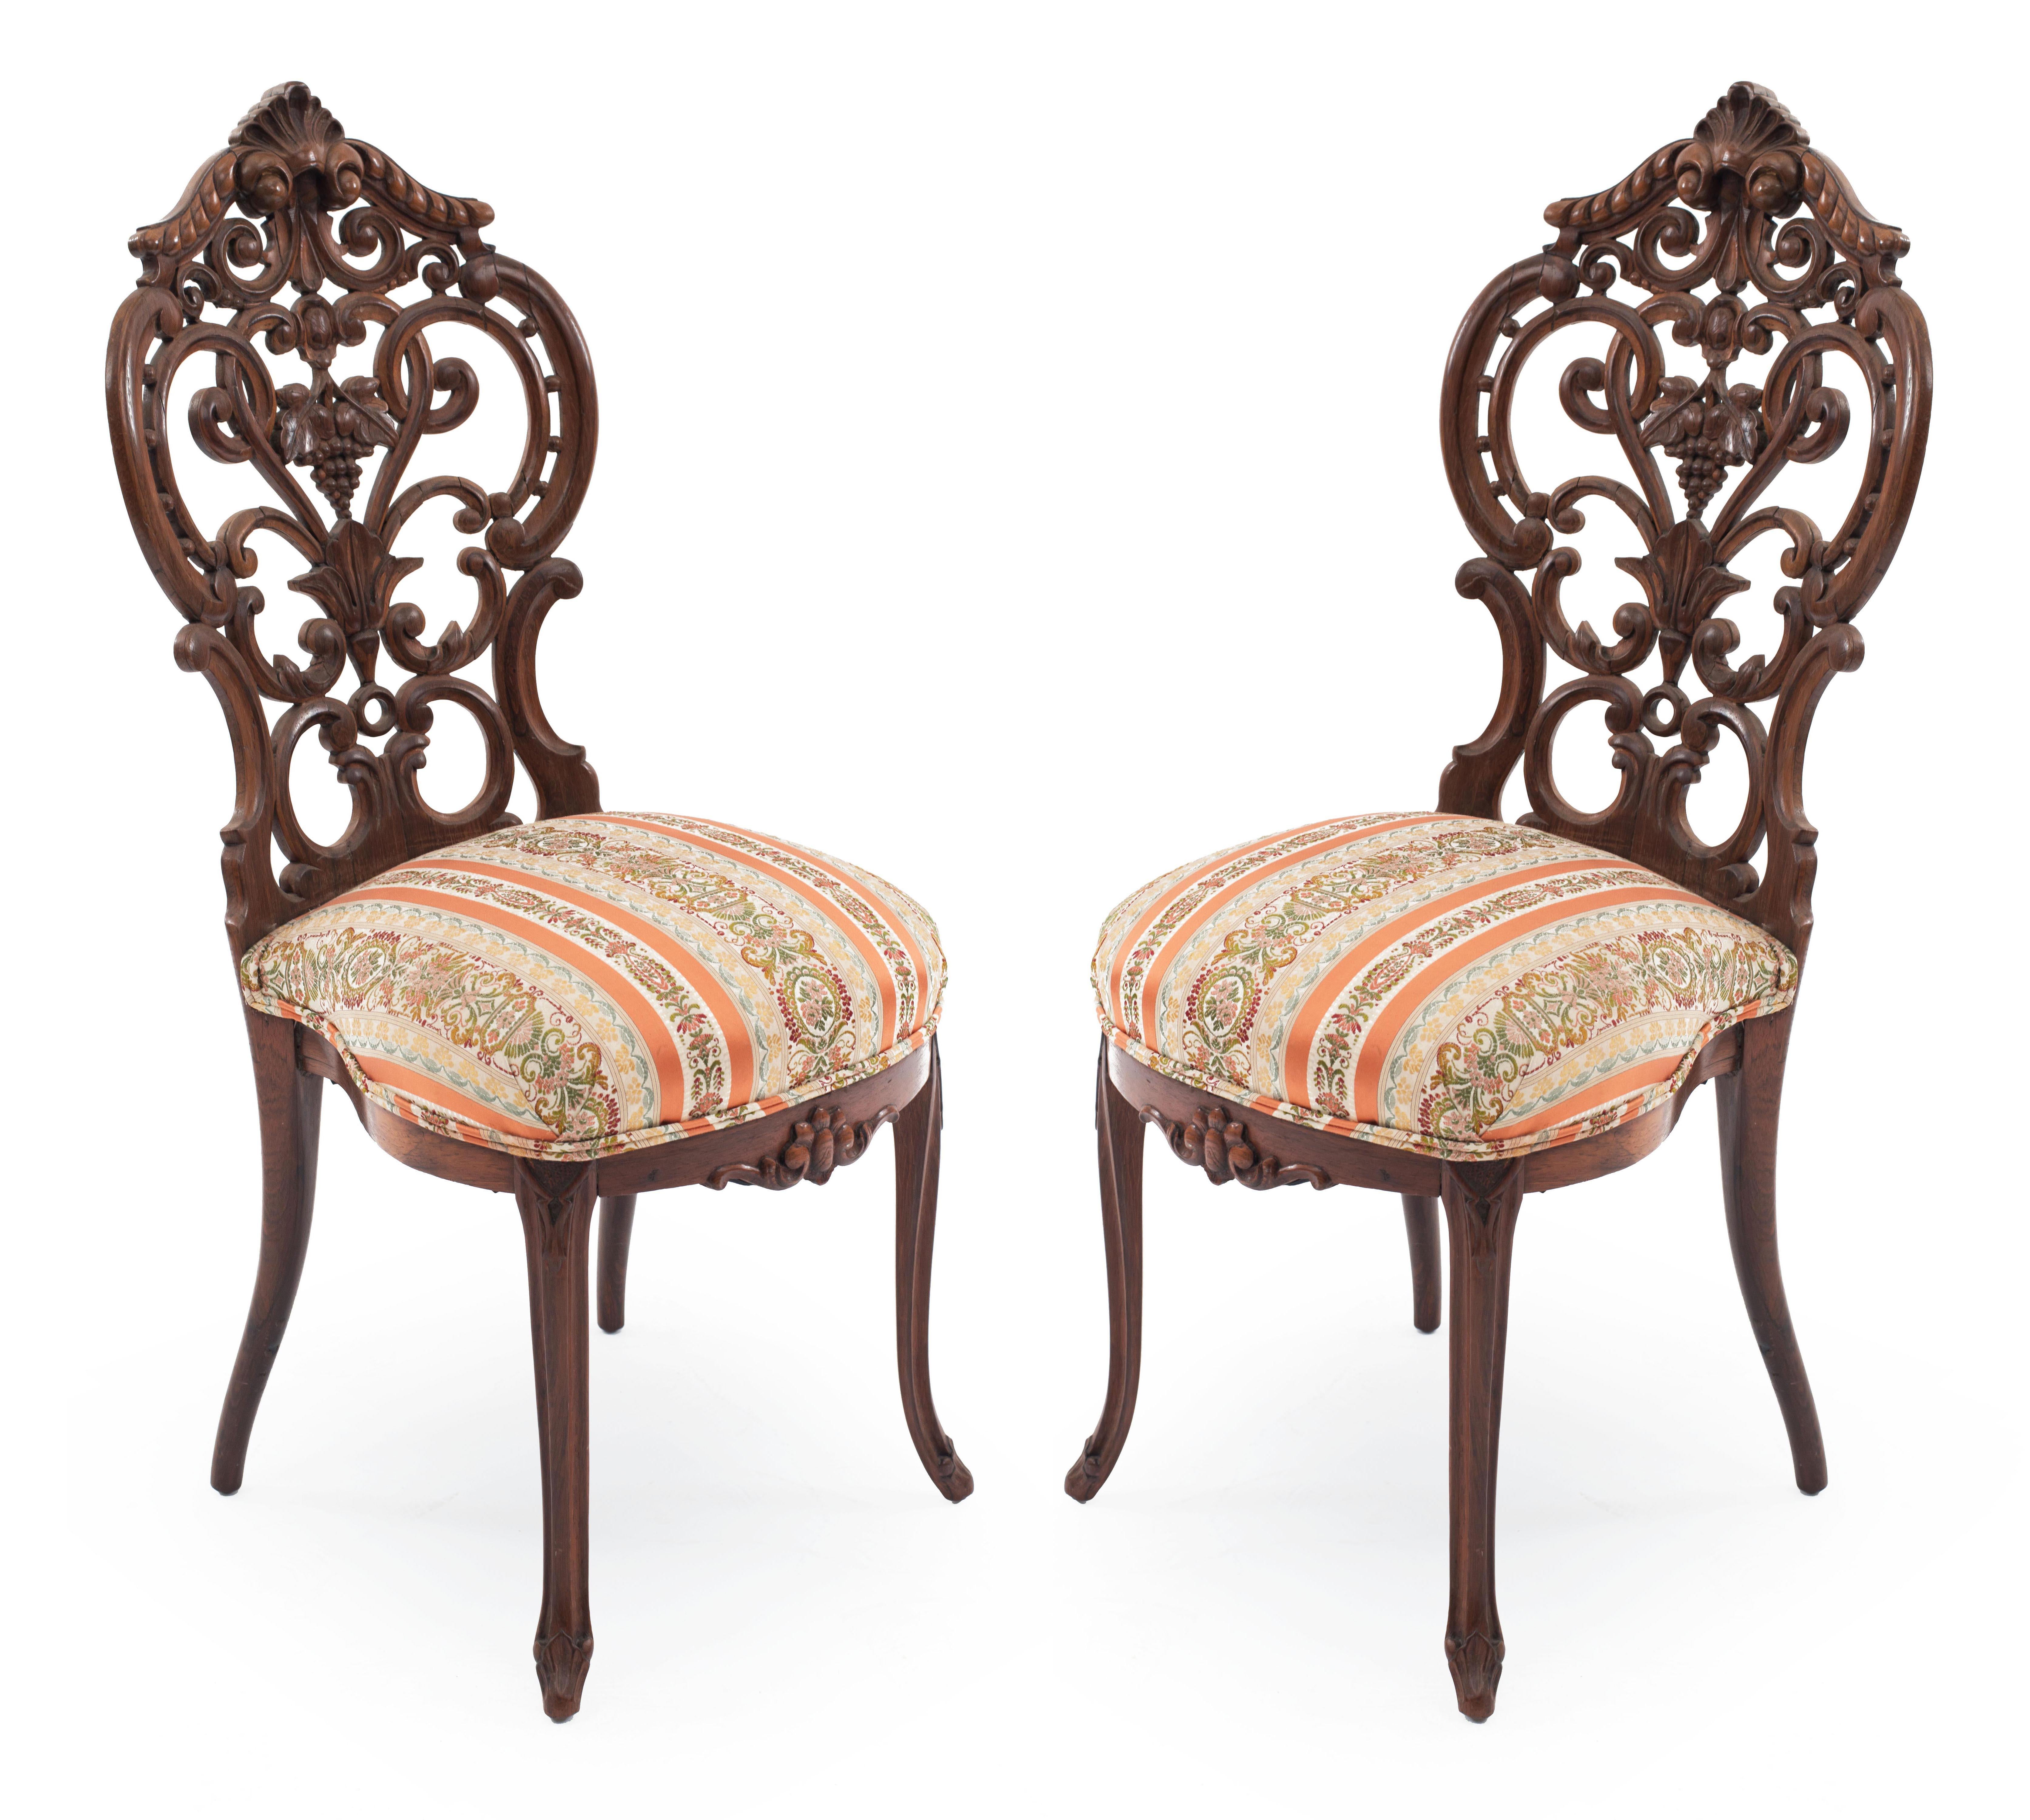 Pair of American Victorian rosewood side chairs with carved filigree and scroll design back and shell crest. (Attributed to John Henry Belter).